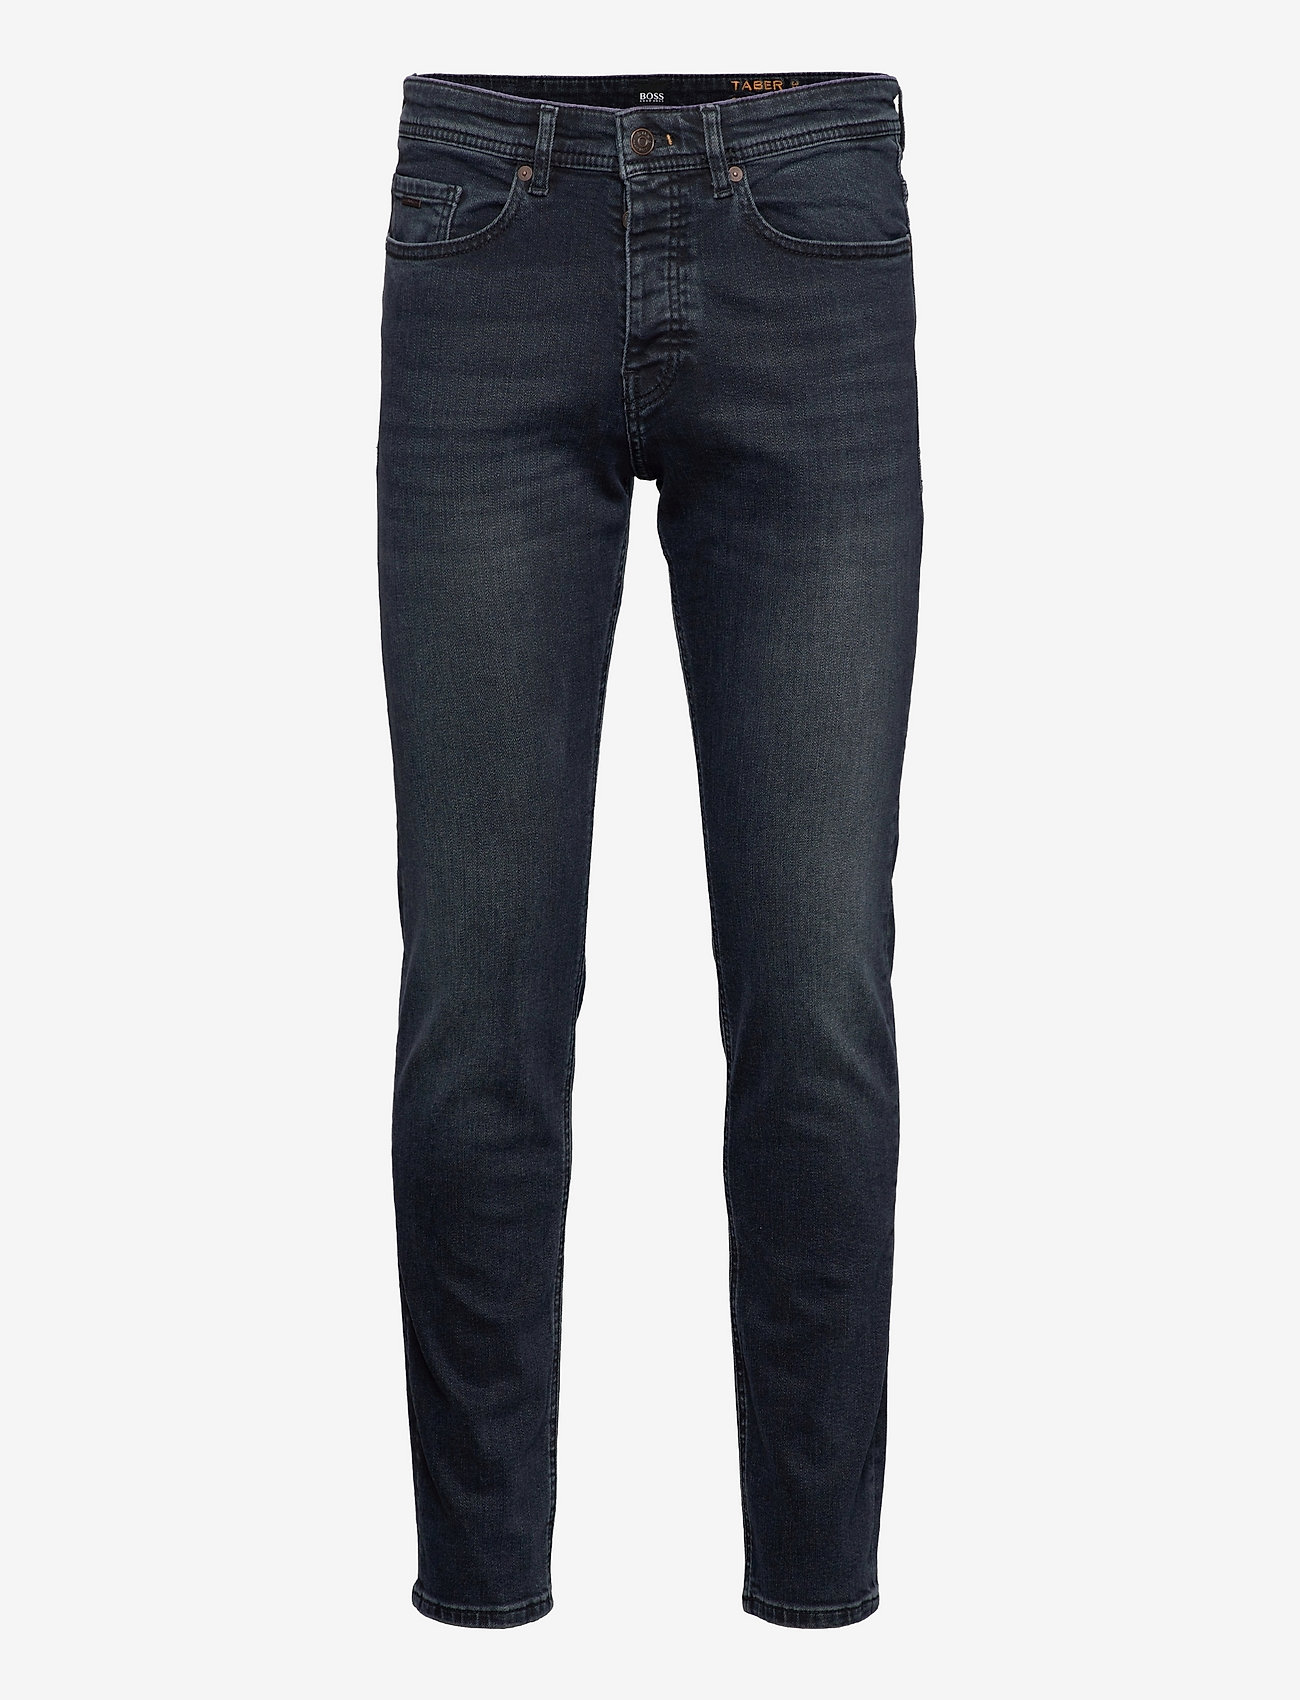 BOSS - Taber BC-P-1 - tapered jeans - navy - 0